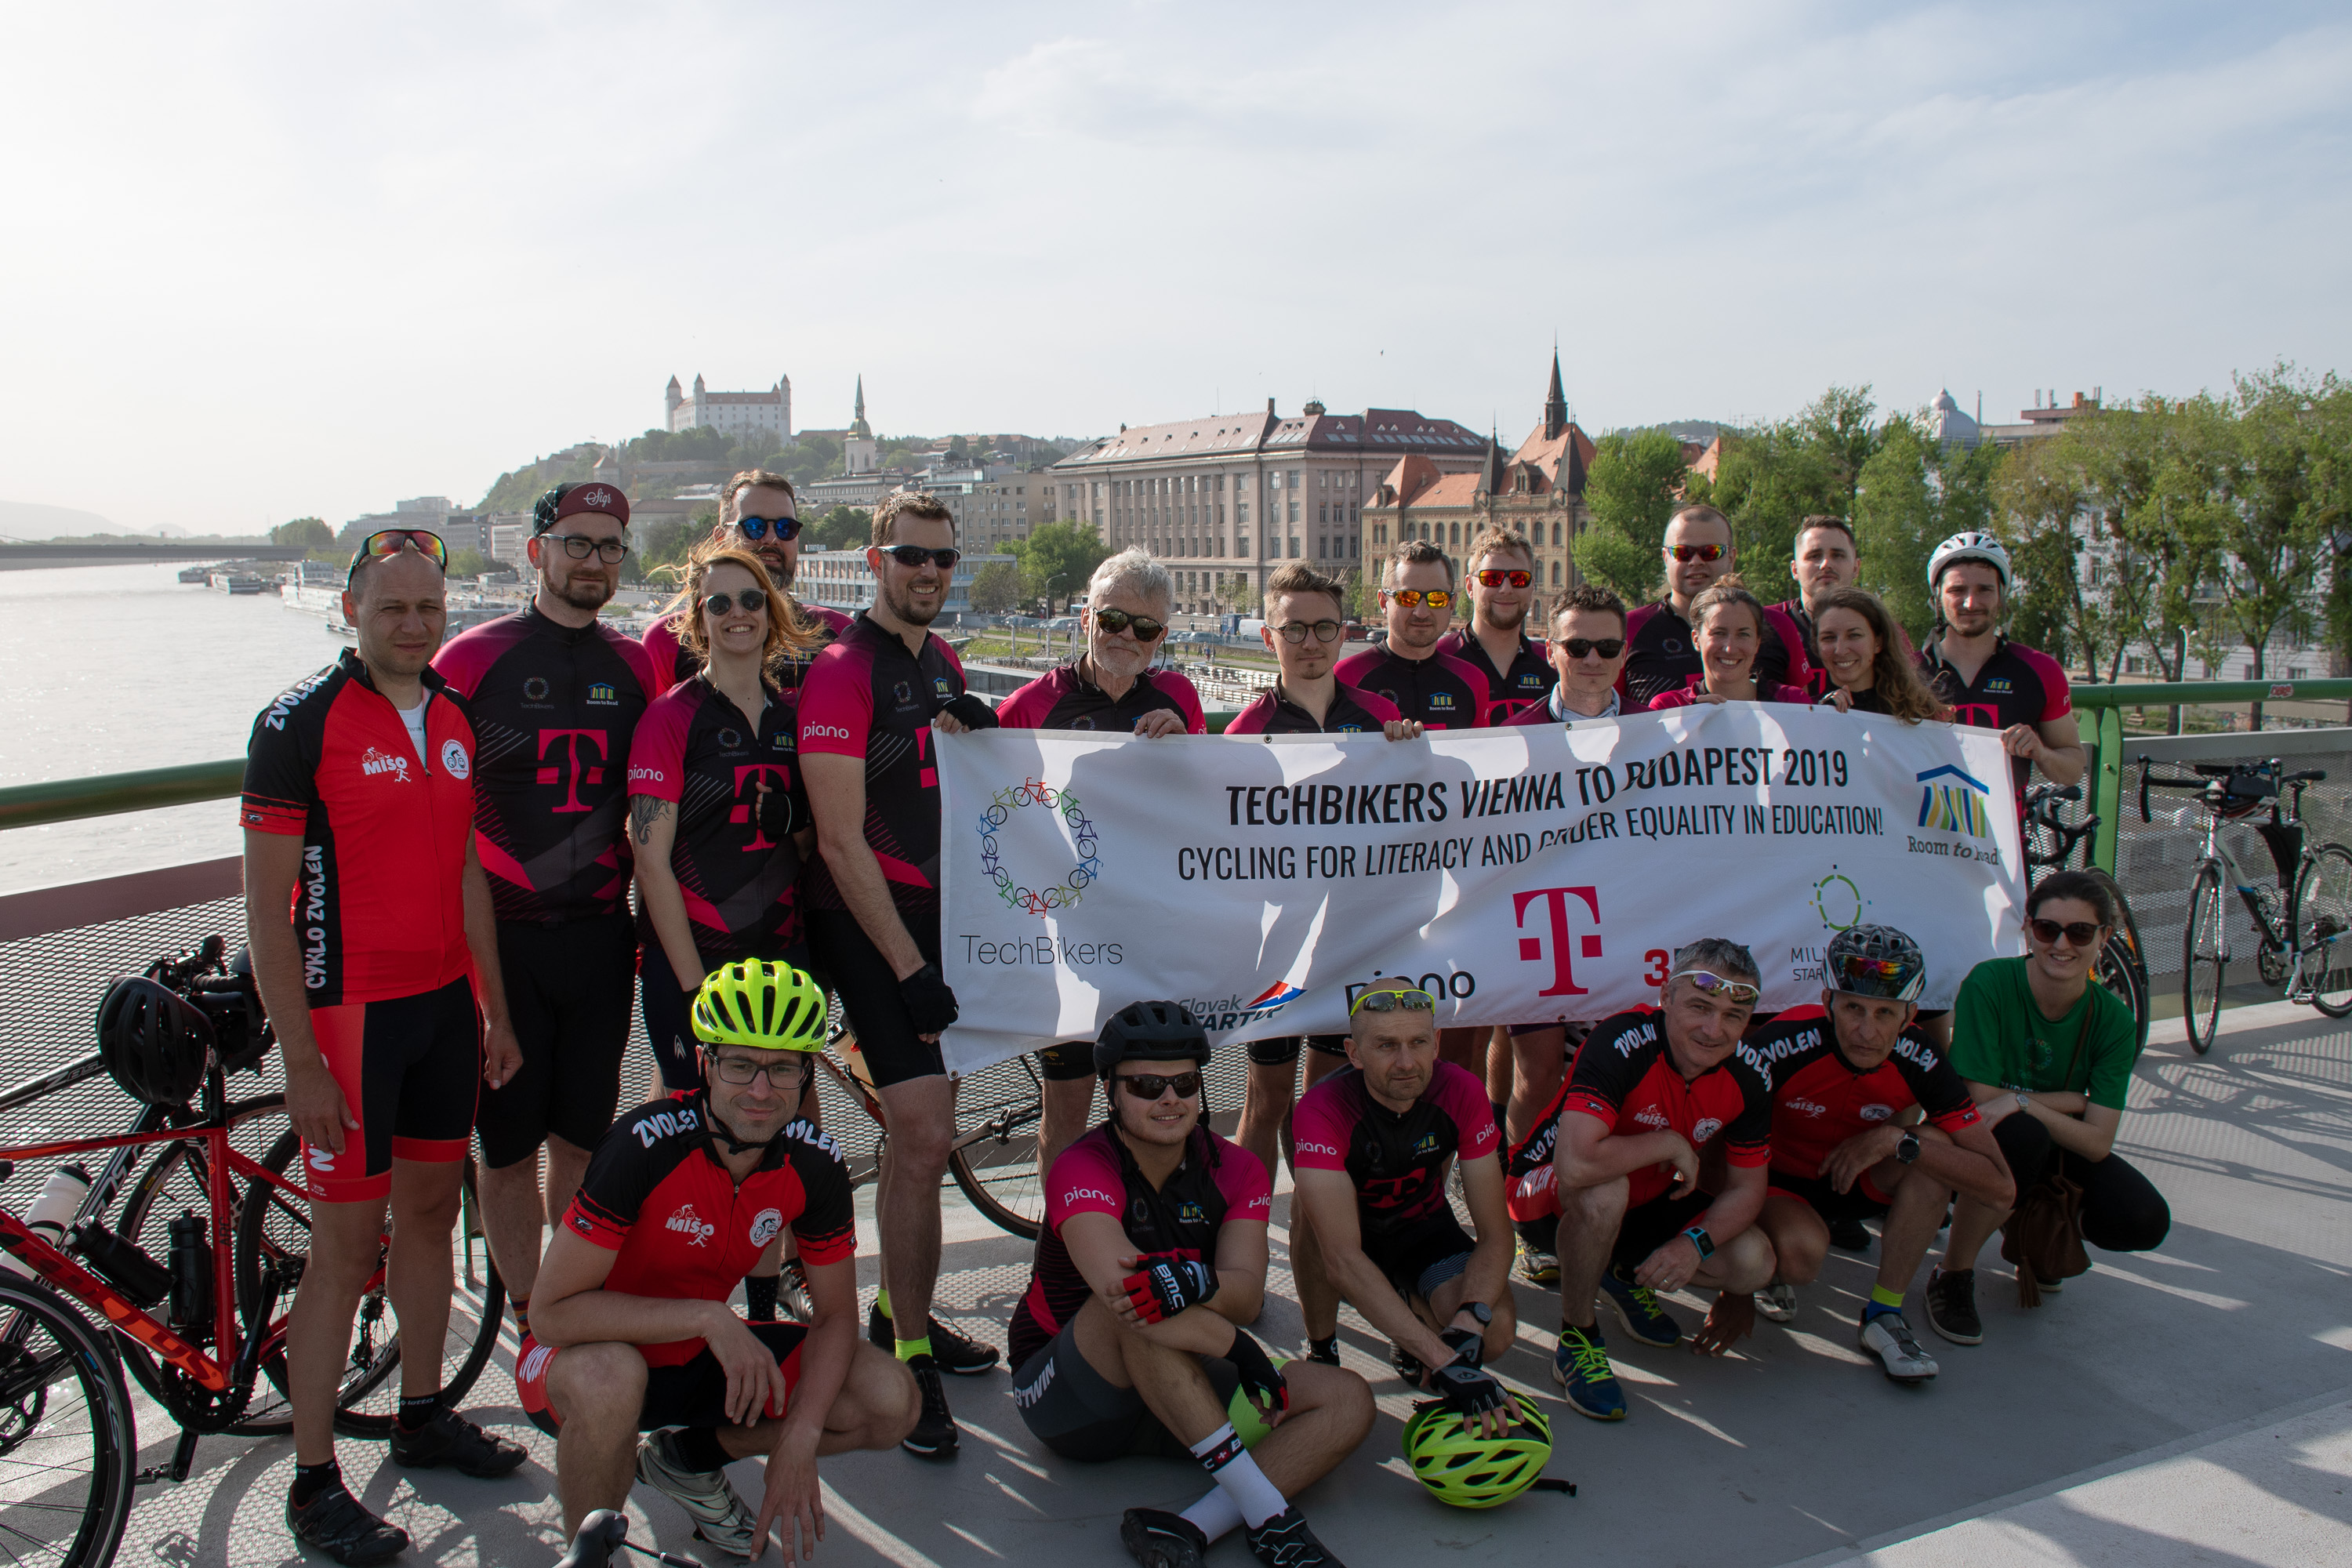 Techbikers CEE 2019: Arrived to the Stary Most in Bratislava